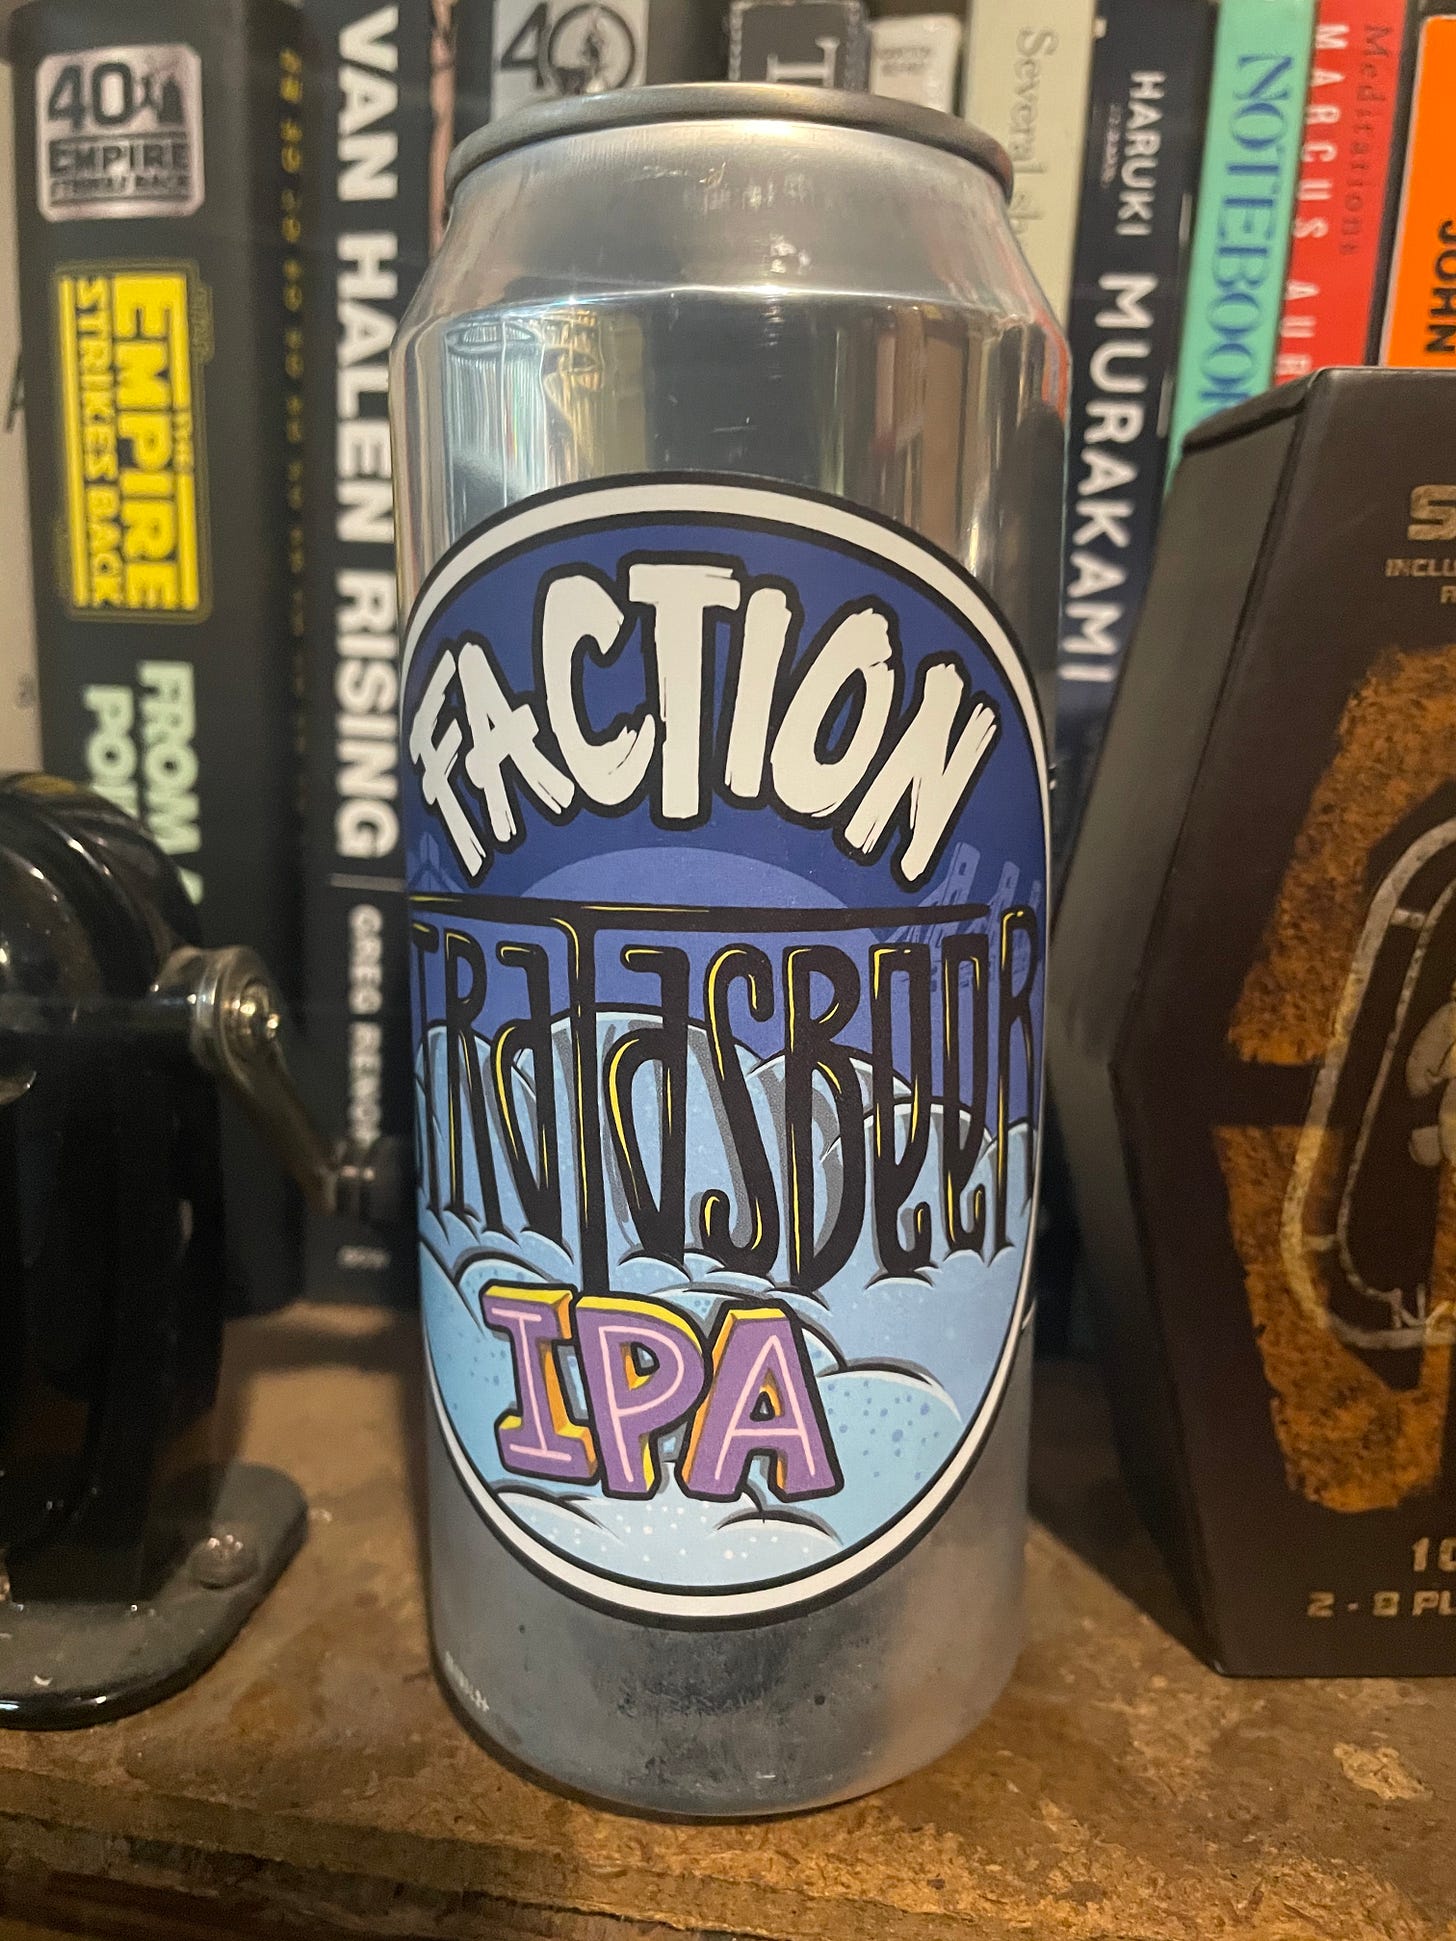 A can of Faction Brewing's "Stratasbeer" IPA